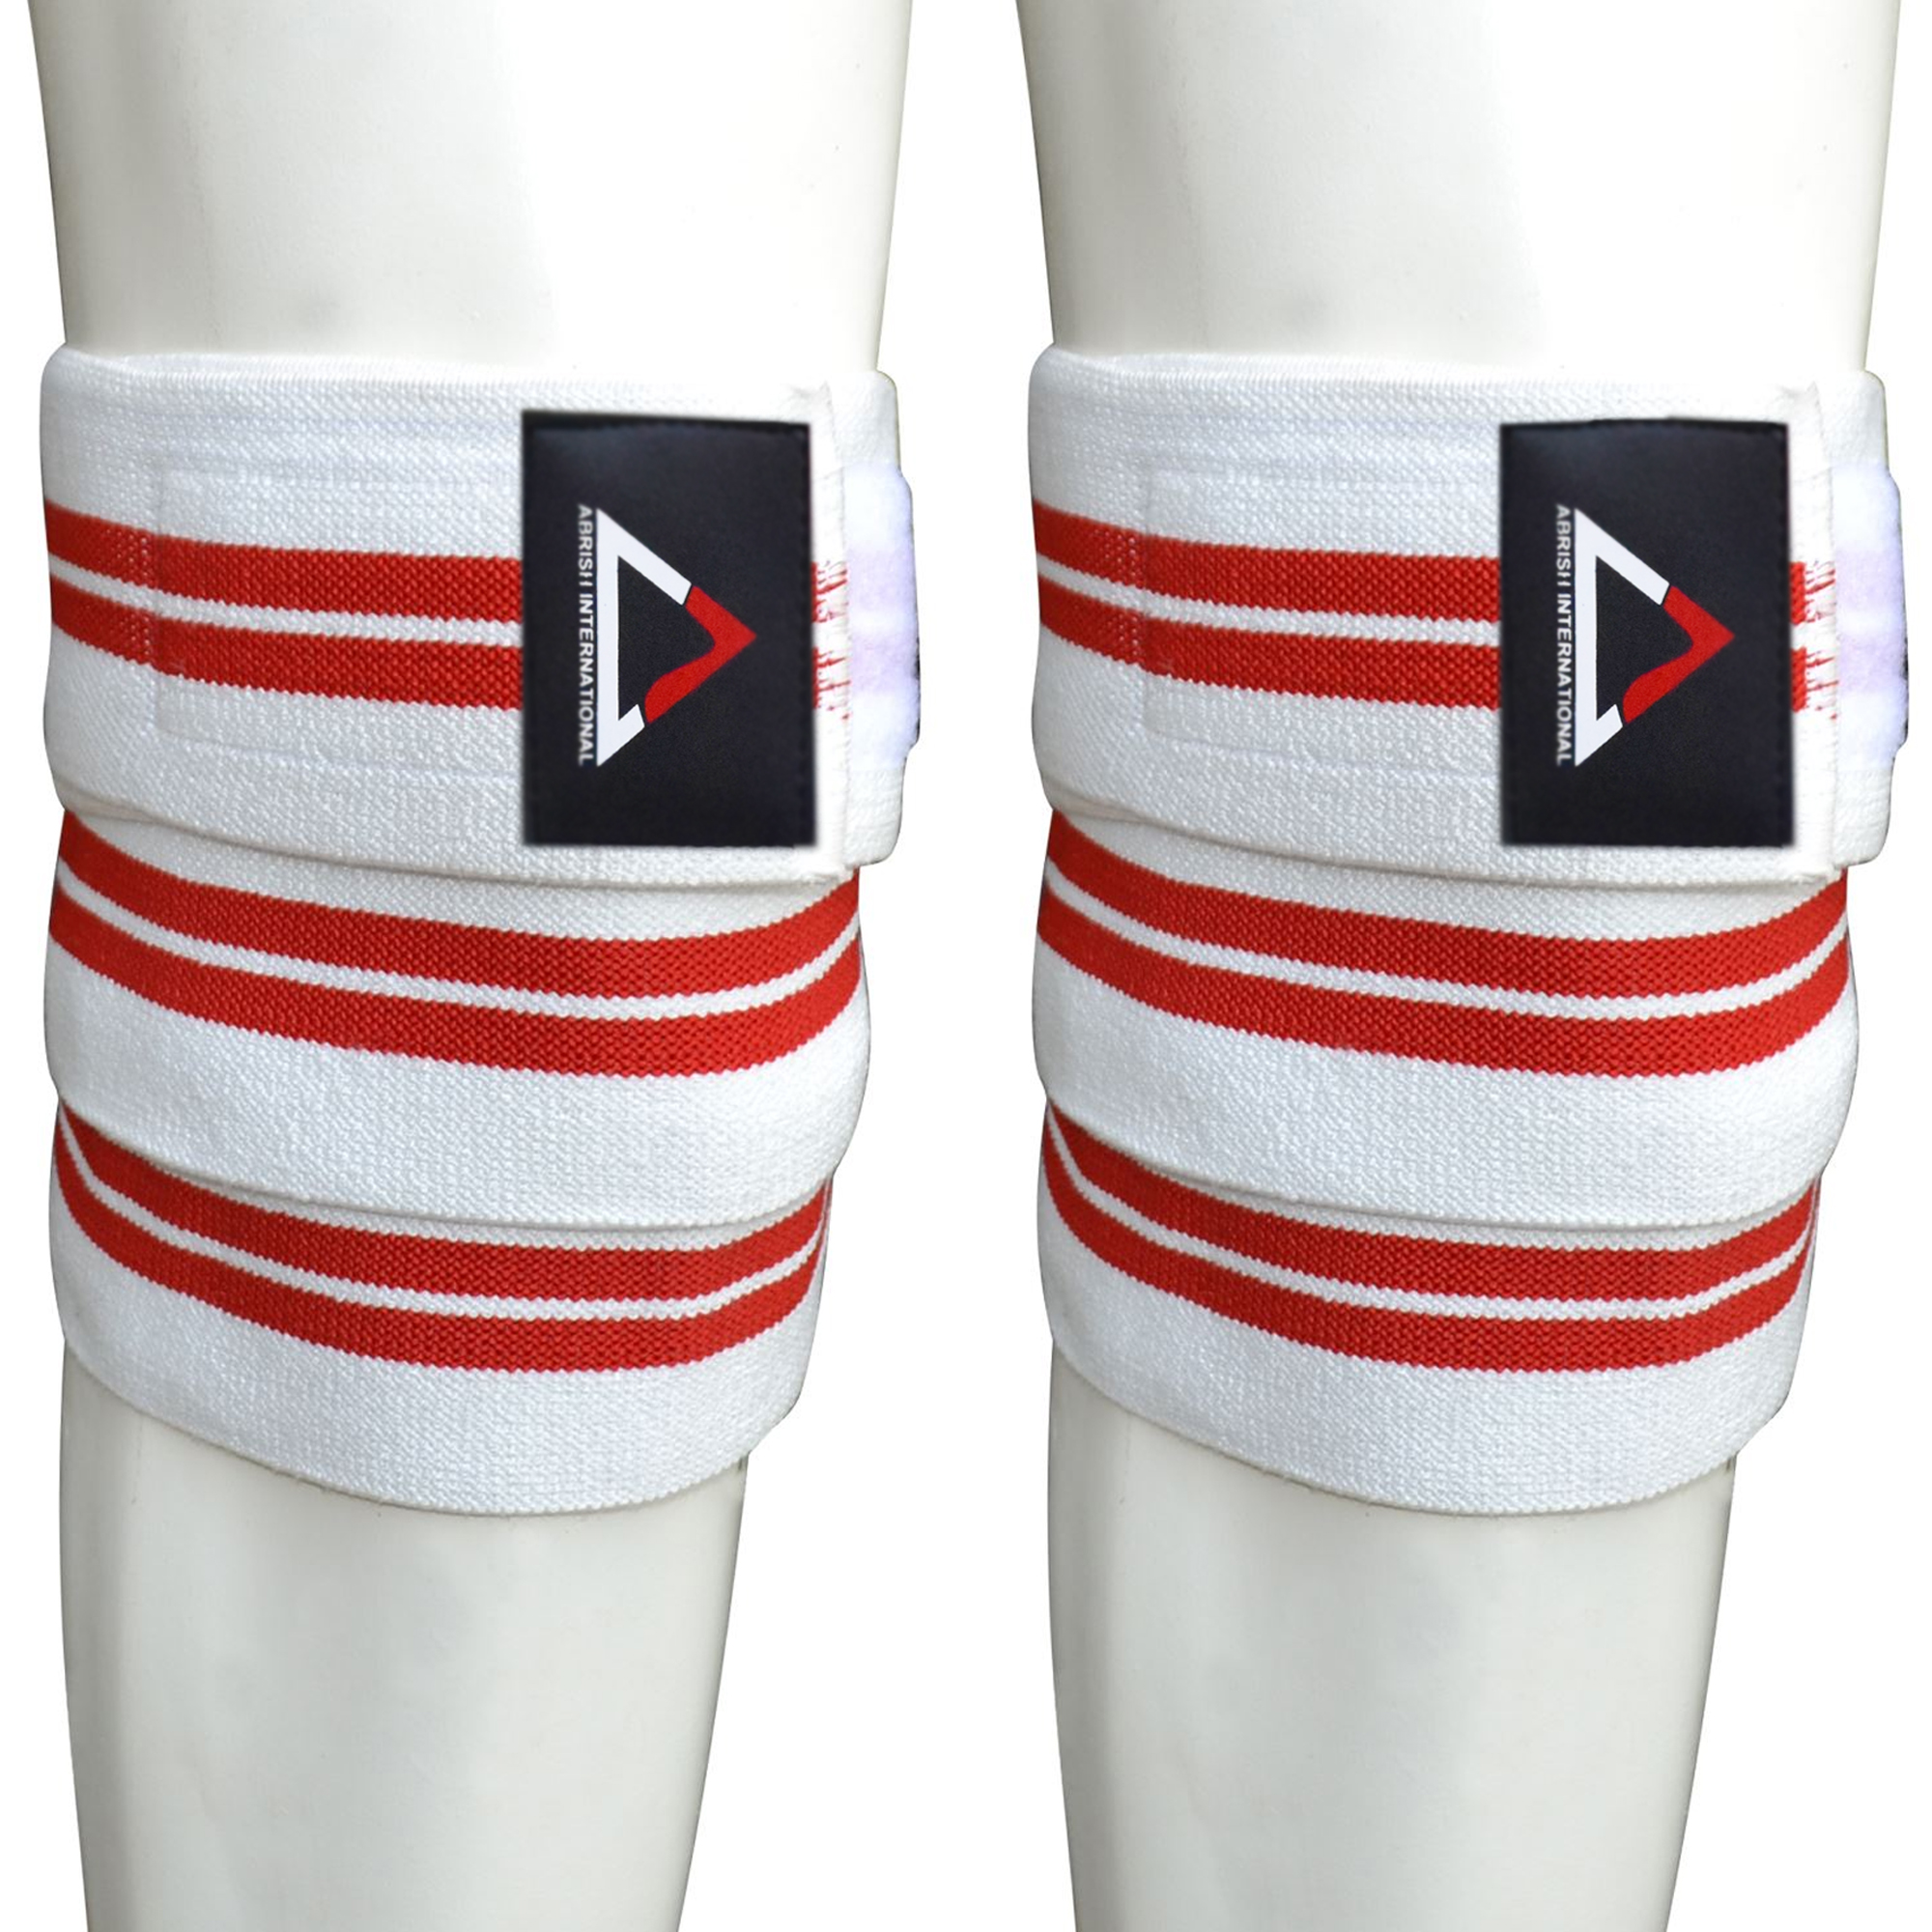 White with Red Lining Knee Wraps